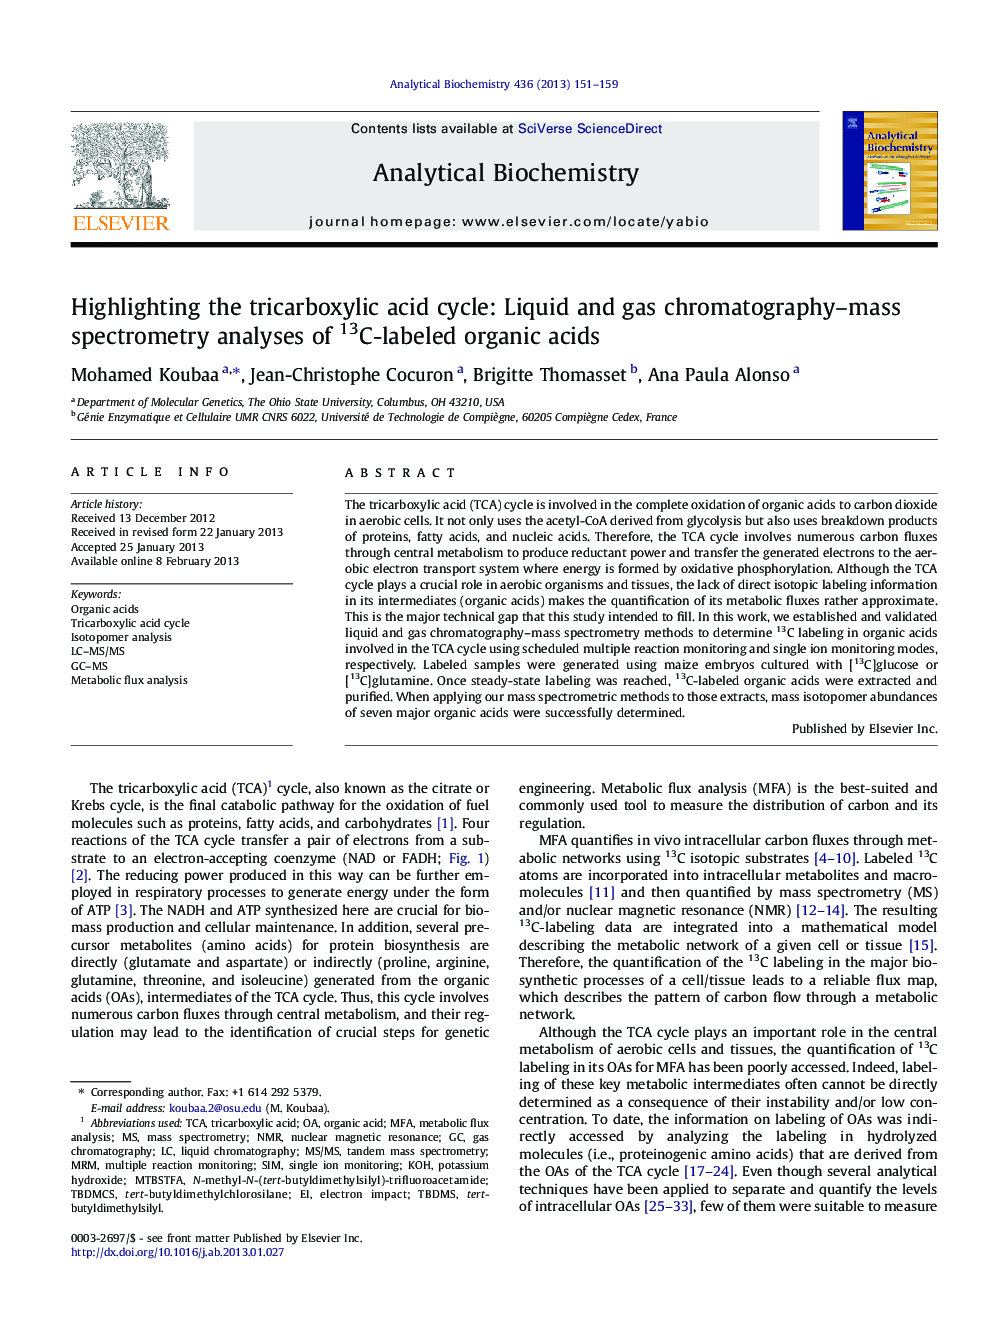 Highlighting the tricarboxylic acid cycle: Liquid and gas chromatography–mass spectrometry analyses of 13C-labeled organic acids